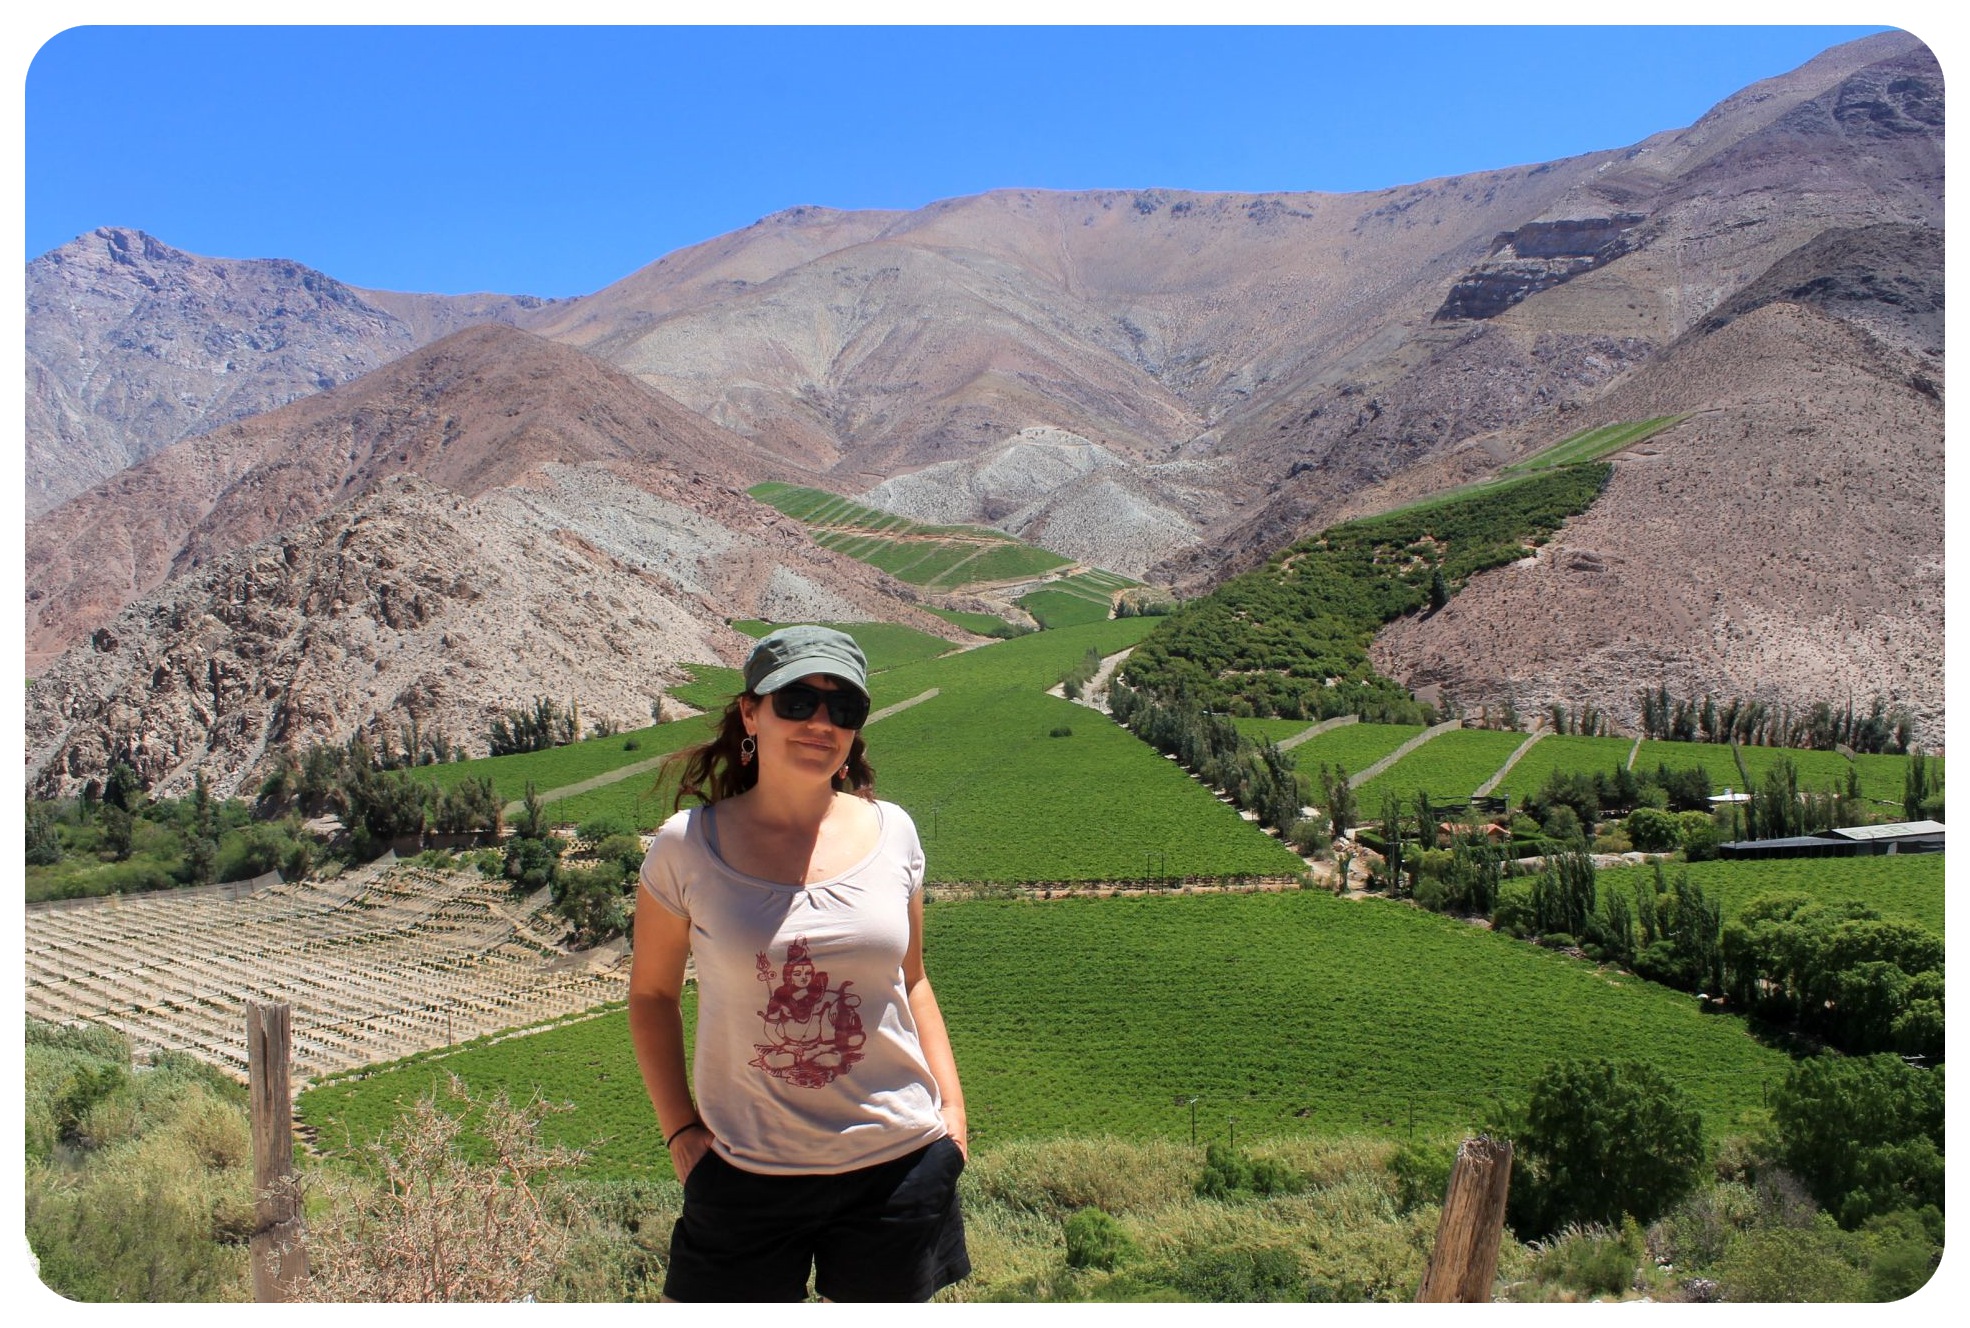 Pisco, papaya and the playa: A trip to La Serena and the Elqui Valley